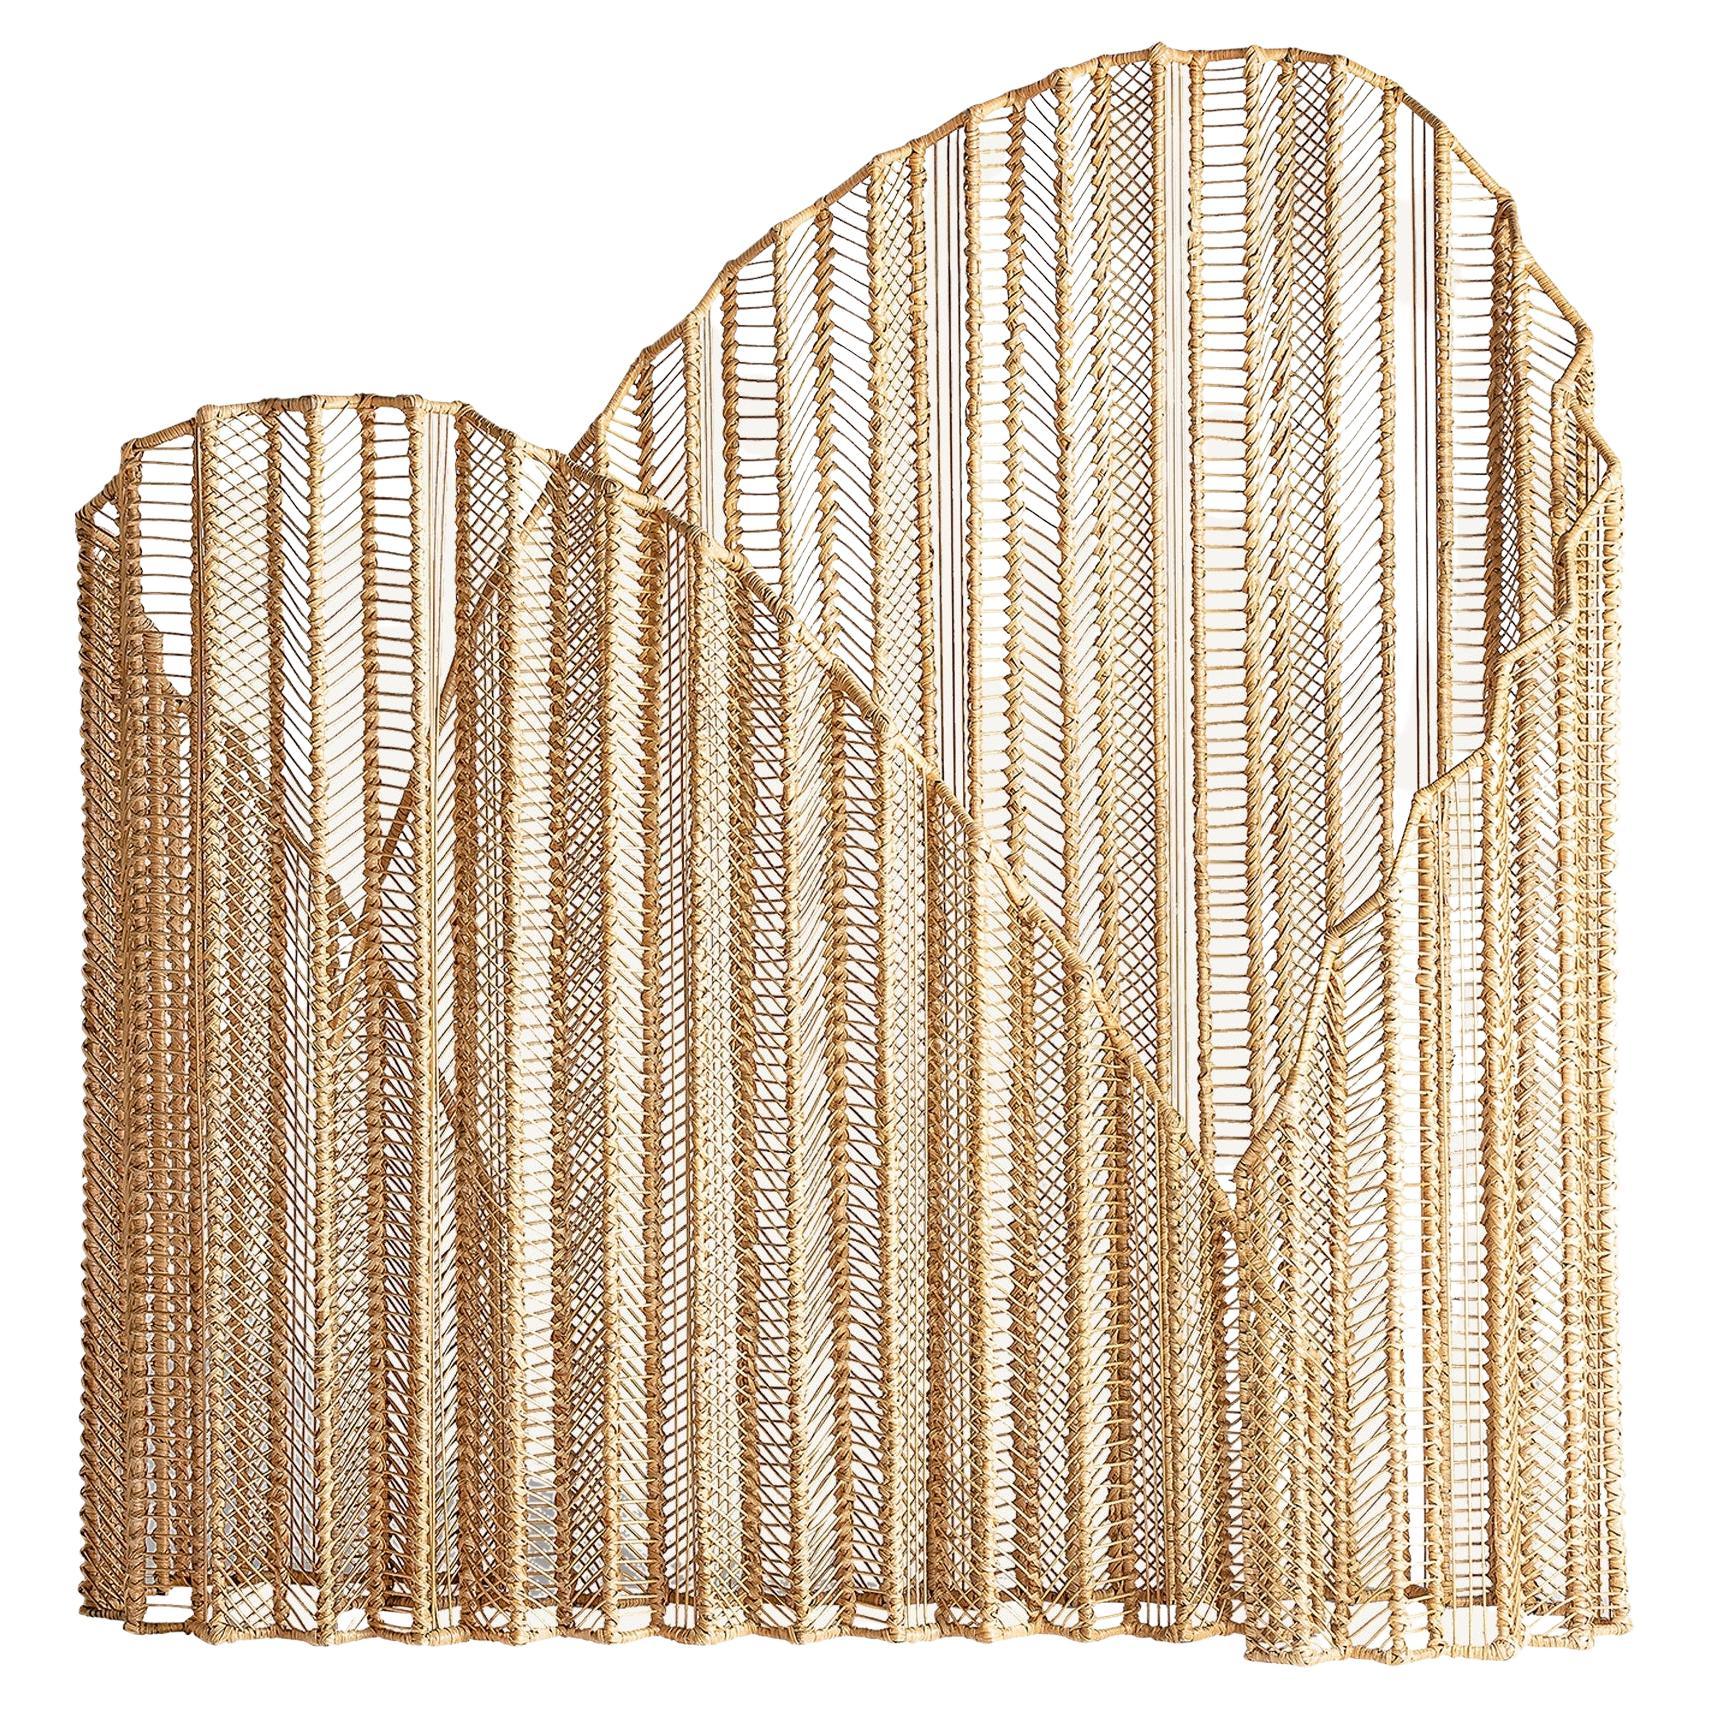 1950s Italian Design Style Metal and Rattan Wicker Curved Screen Divider For Sale